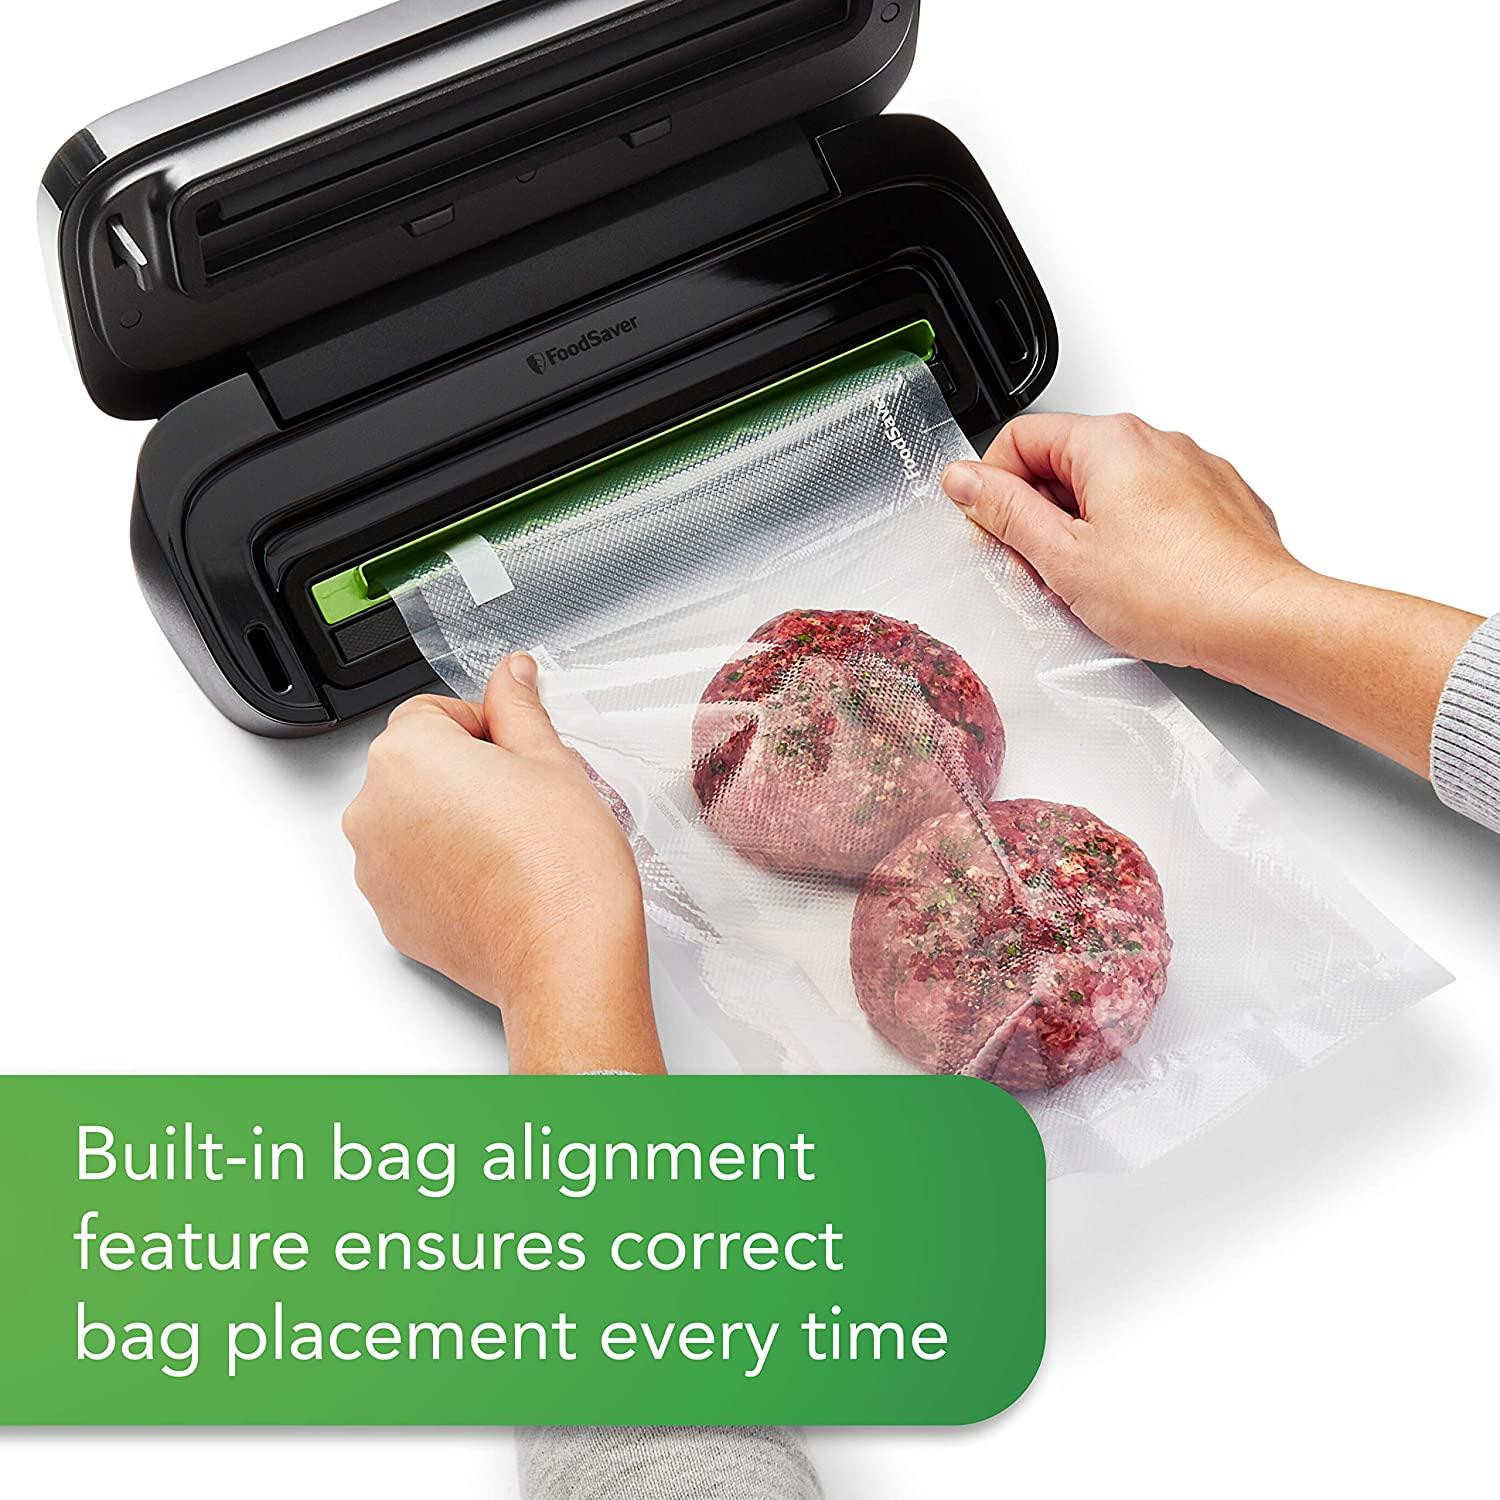 FoodSaver Compact Vacuum Sealer Machine with Sealer Bags and Roll